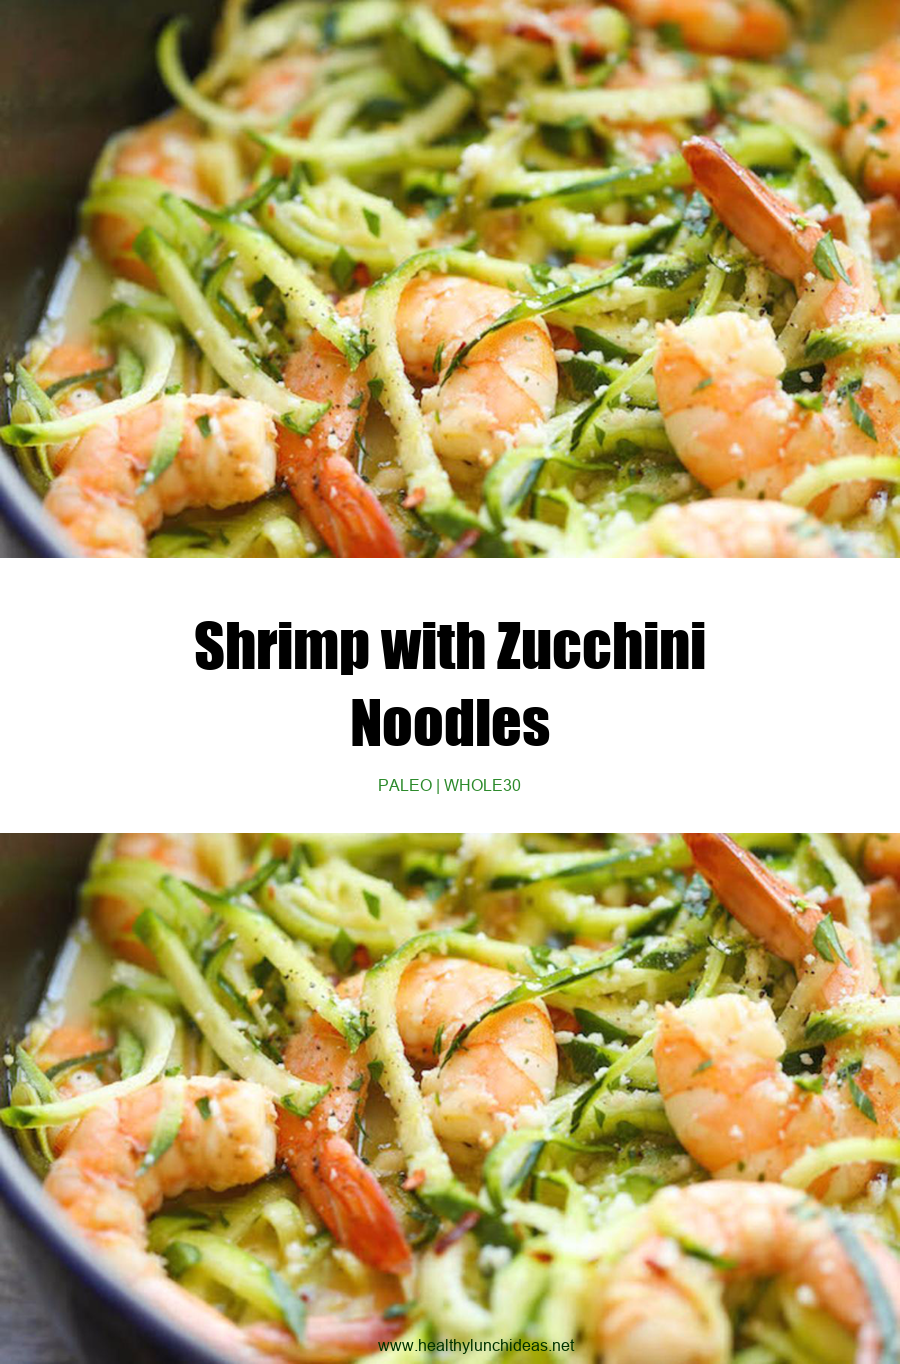 Healthy Recipes: Shrimp with Zucchini Noodles Recipe